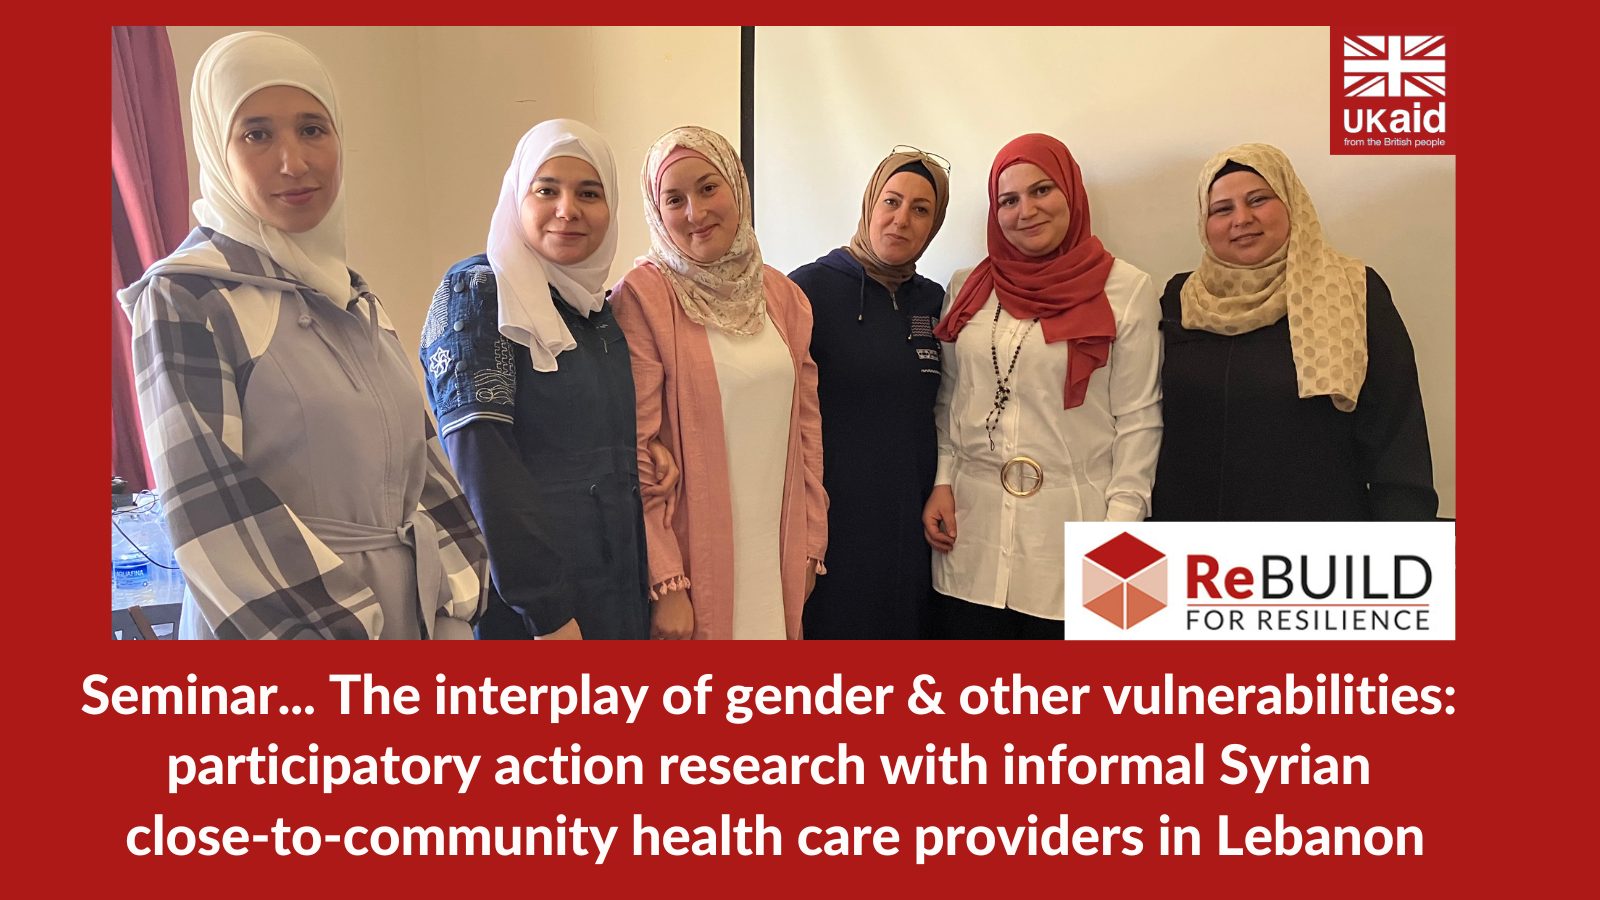 Six standing, smiling female health workers and the words 'Seminar: The interplay of gender and other vulnerabilities: A participatory action research with informal Syrian CTC providers in Lebanon'